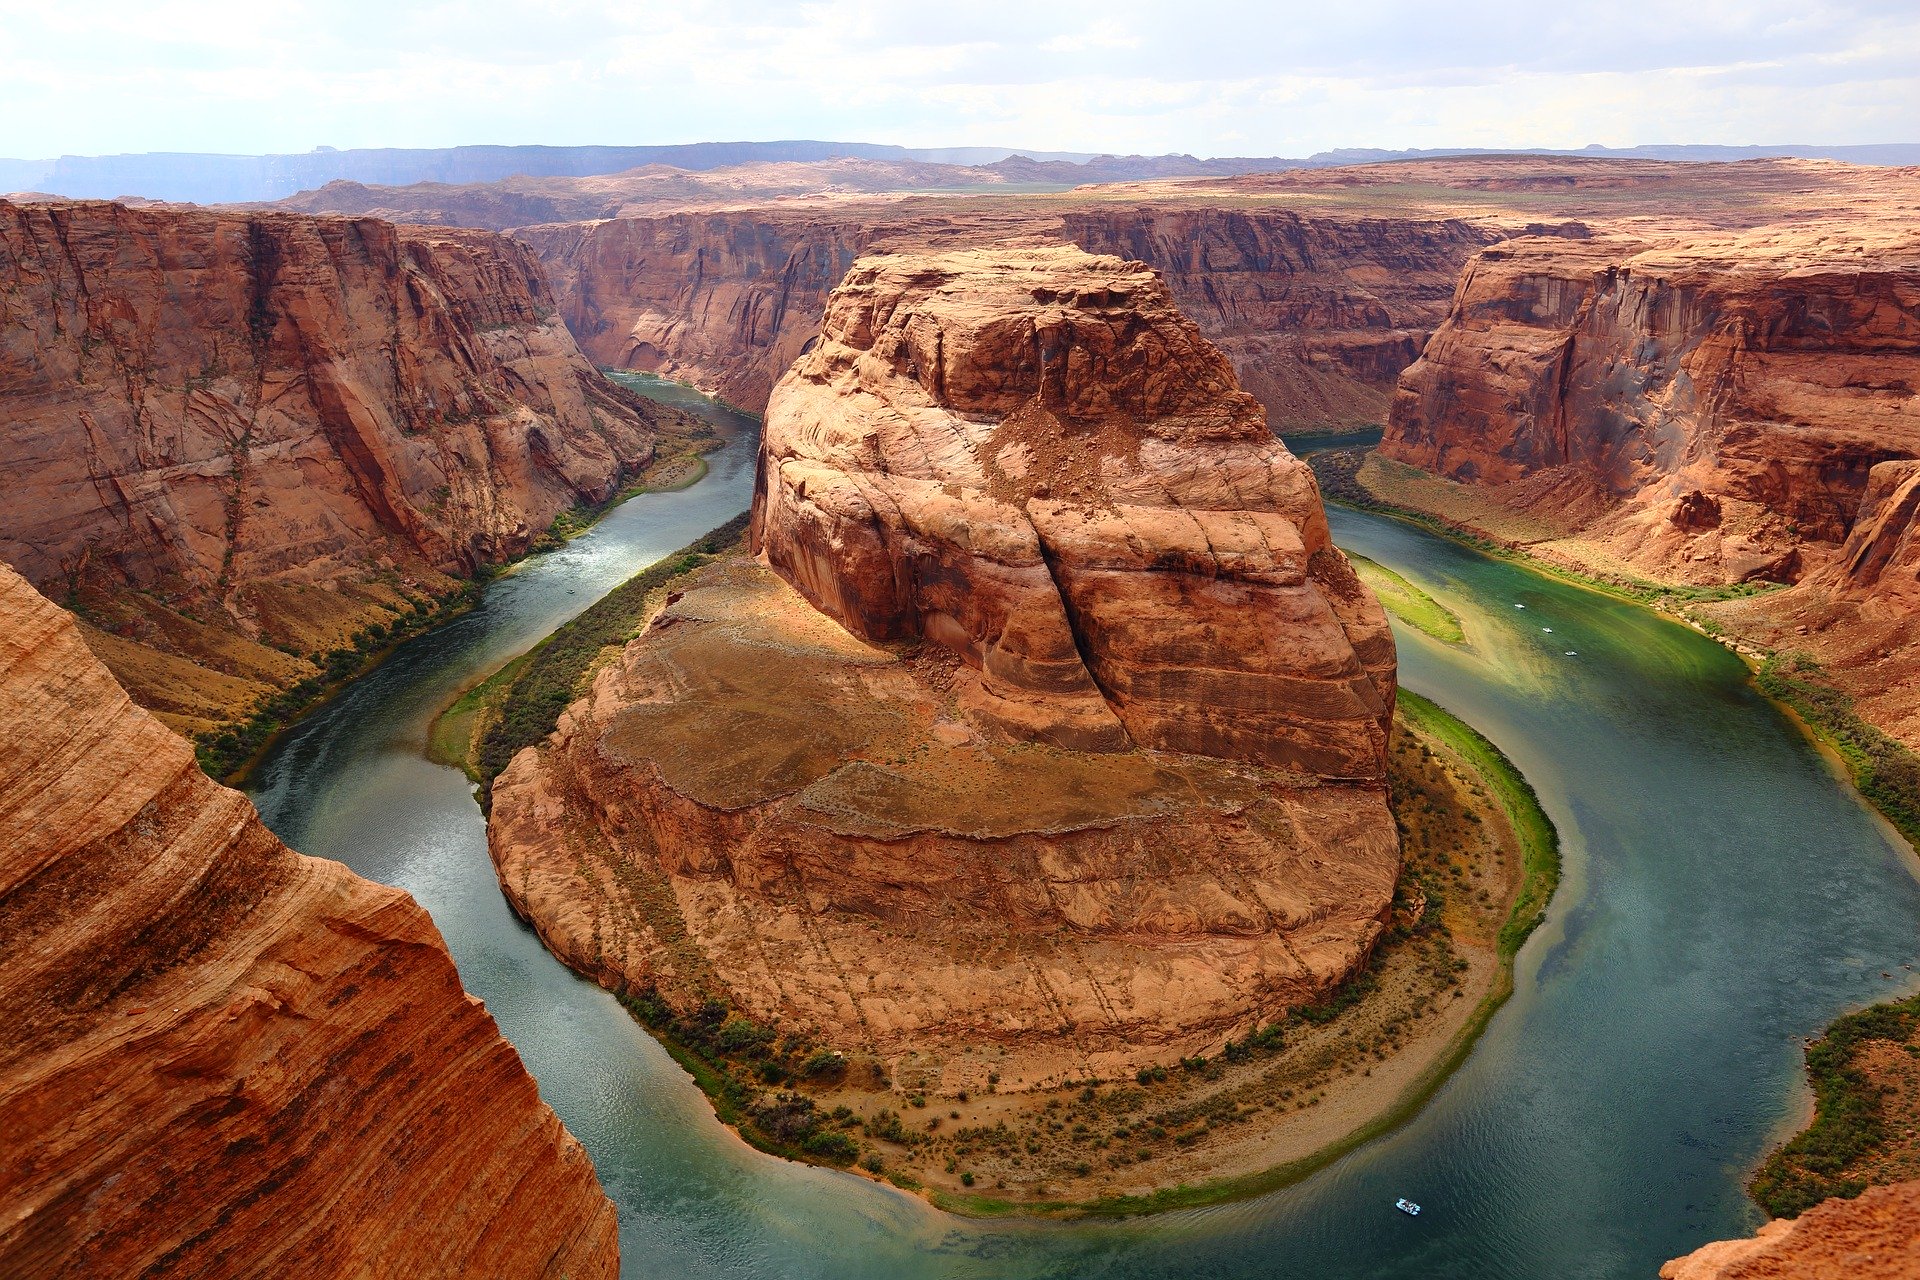 Bend in a river and canyon